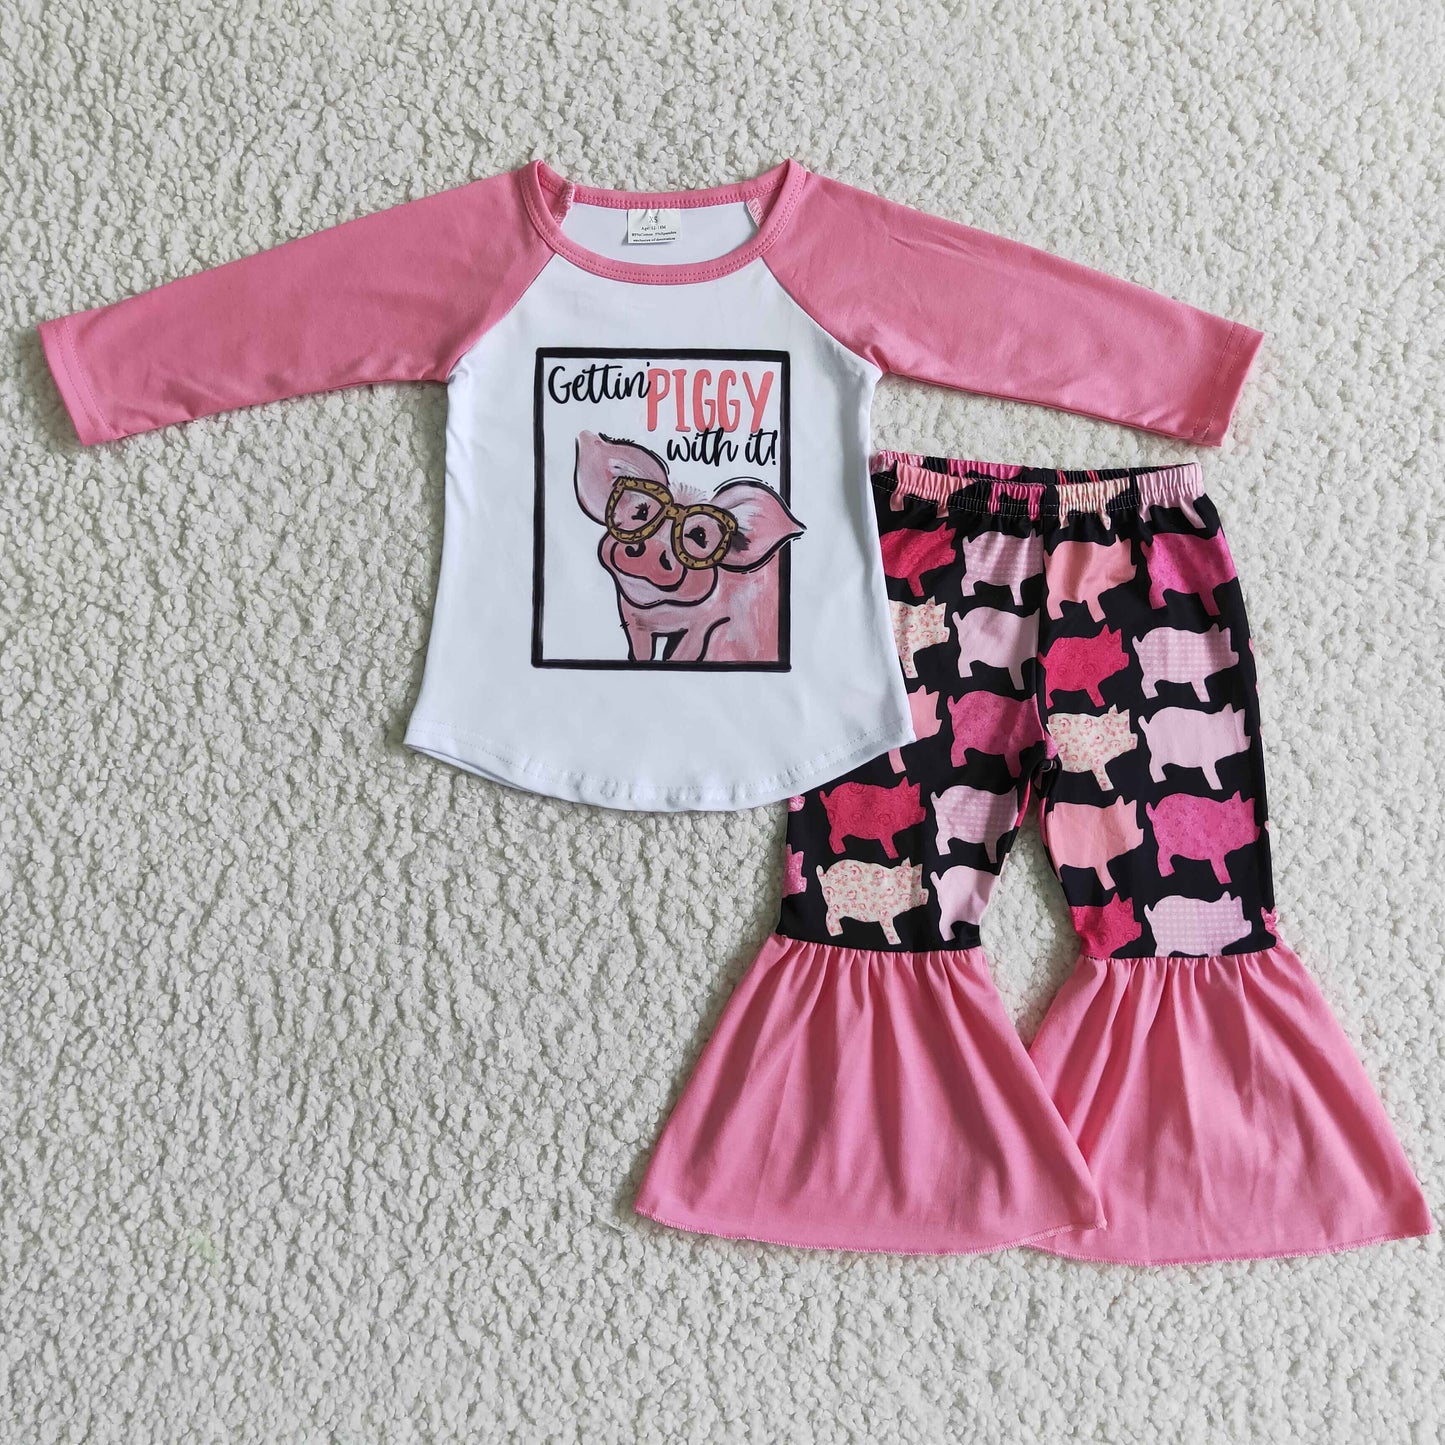 6 A10-17 girls outfit long sleeve and long pants pink pig print